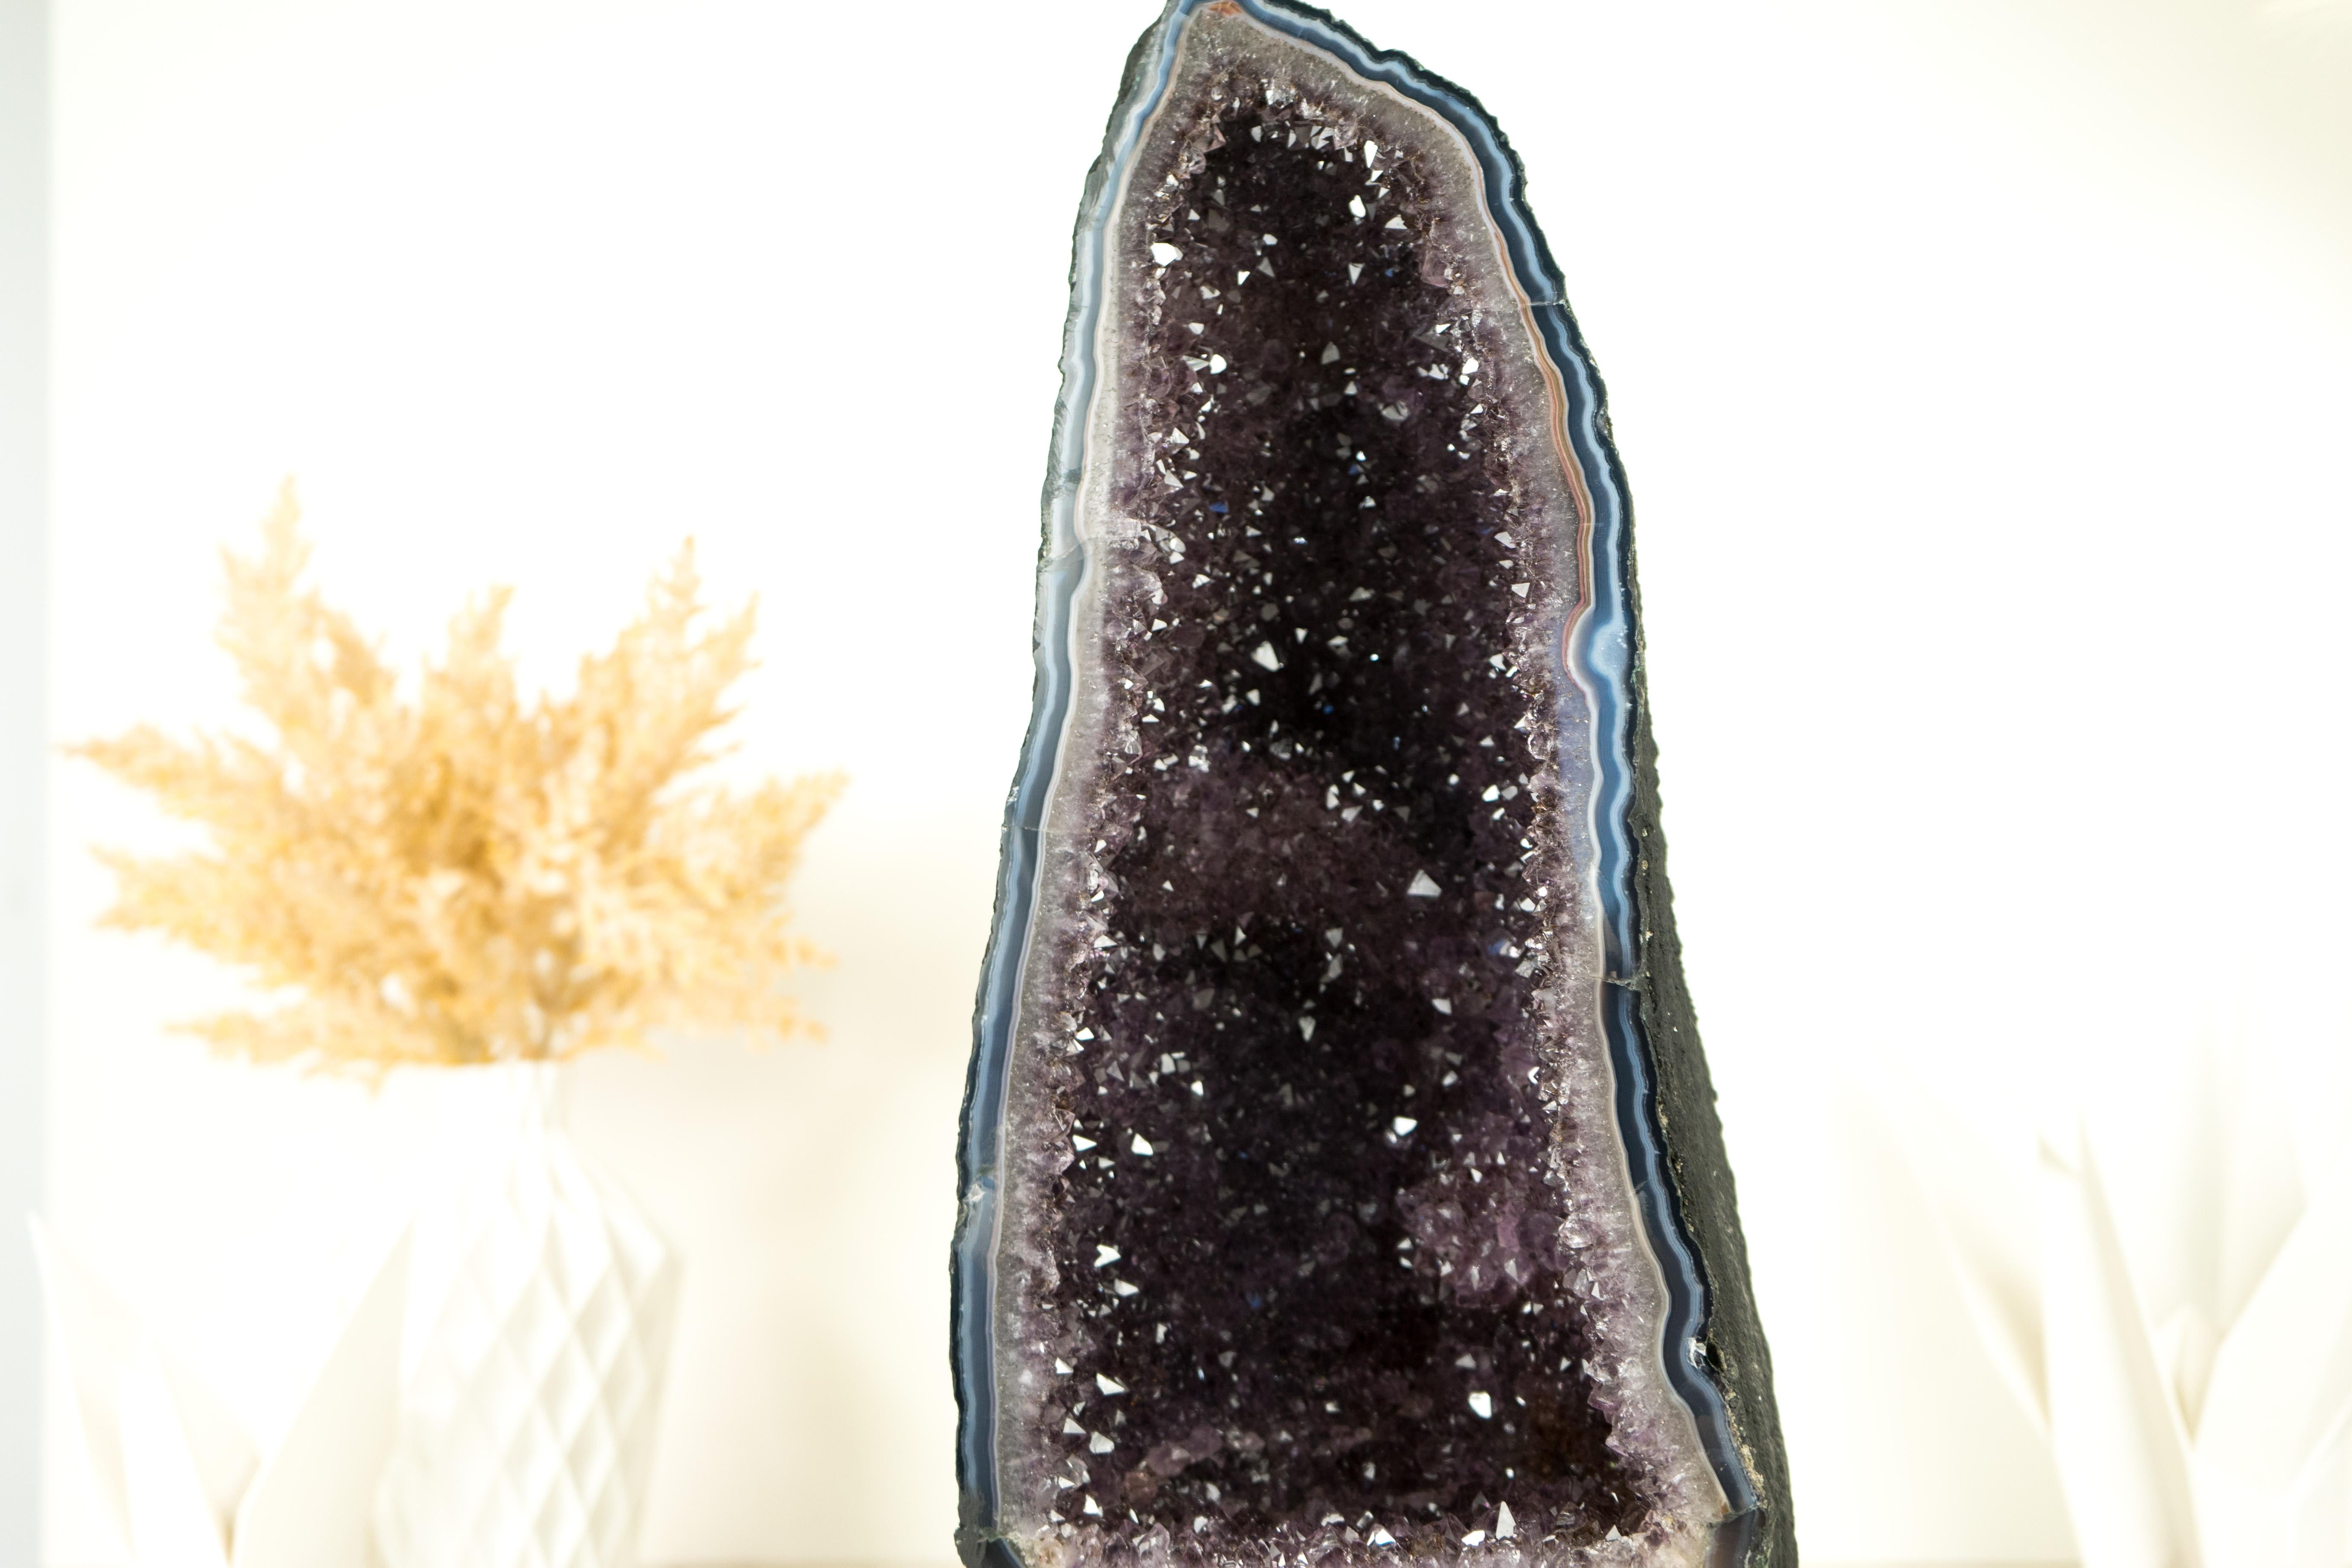 An Agate Geode that will elevate your space with its sparkly Lavender Amethyst Druzy and rare lace agate formation, this geode brings beauty and sophistication to any home or office decor, be it a table, shelf, or a special space.

The first thing